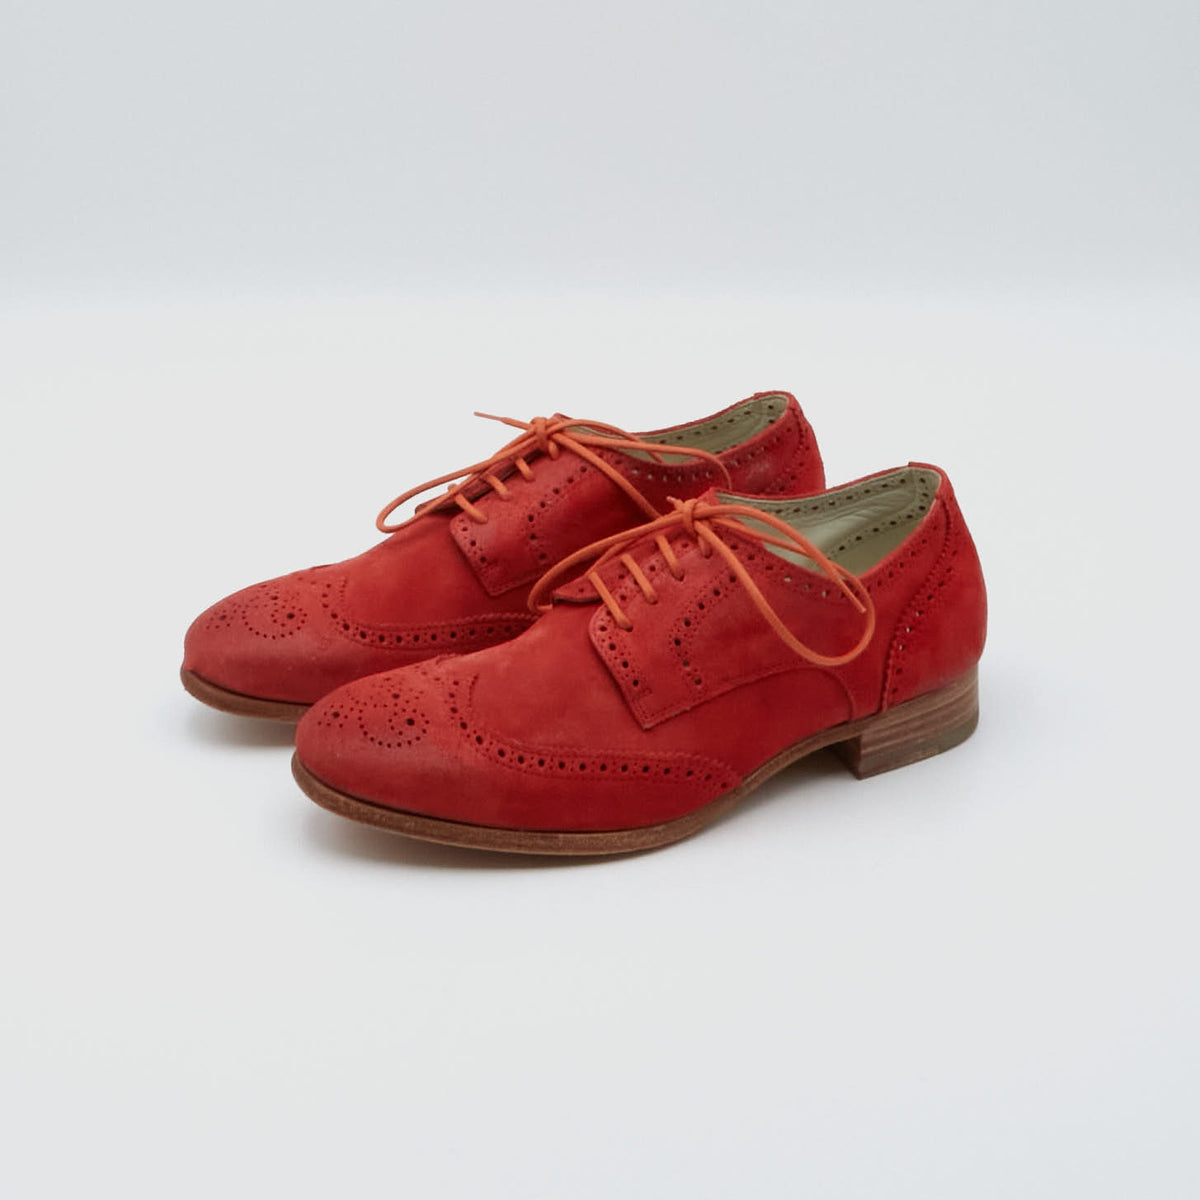 n.d.c made by hand Ladies Suede  Brogues Shoes